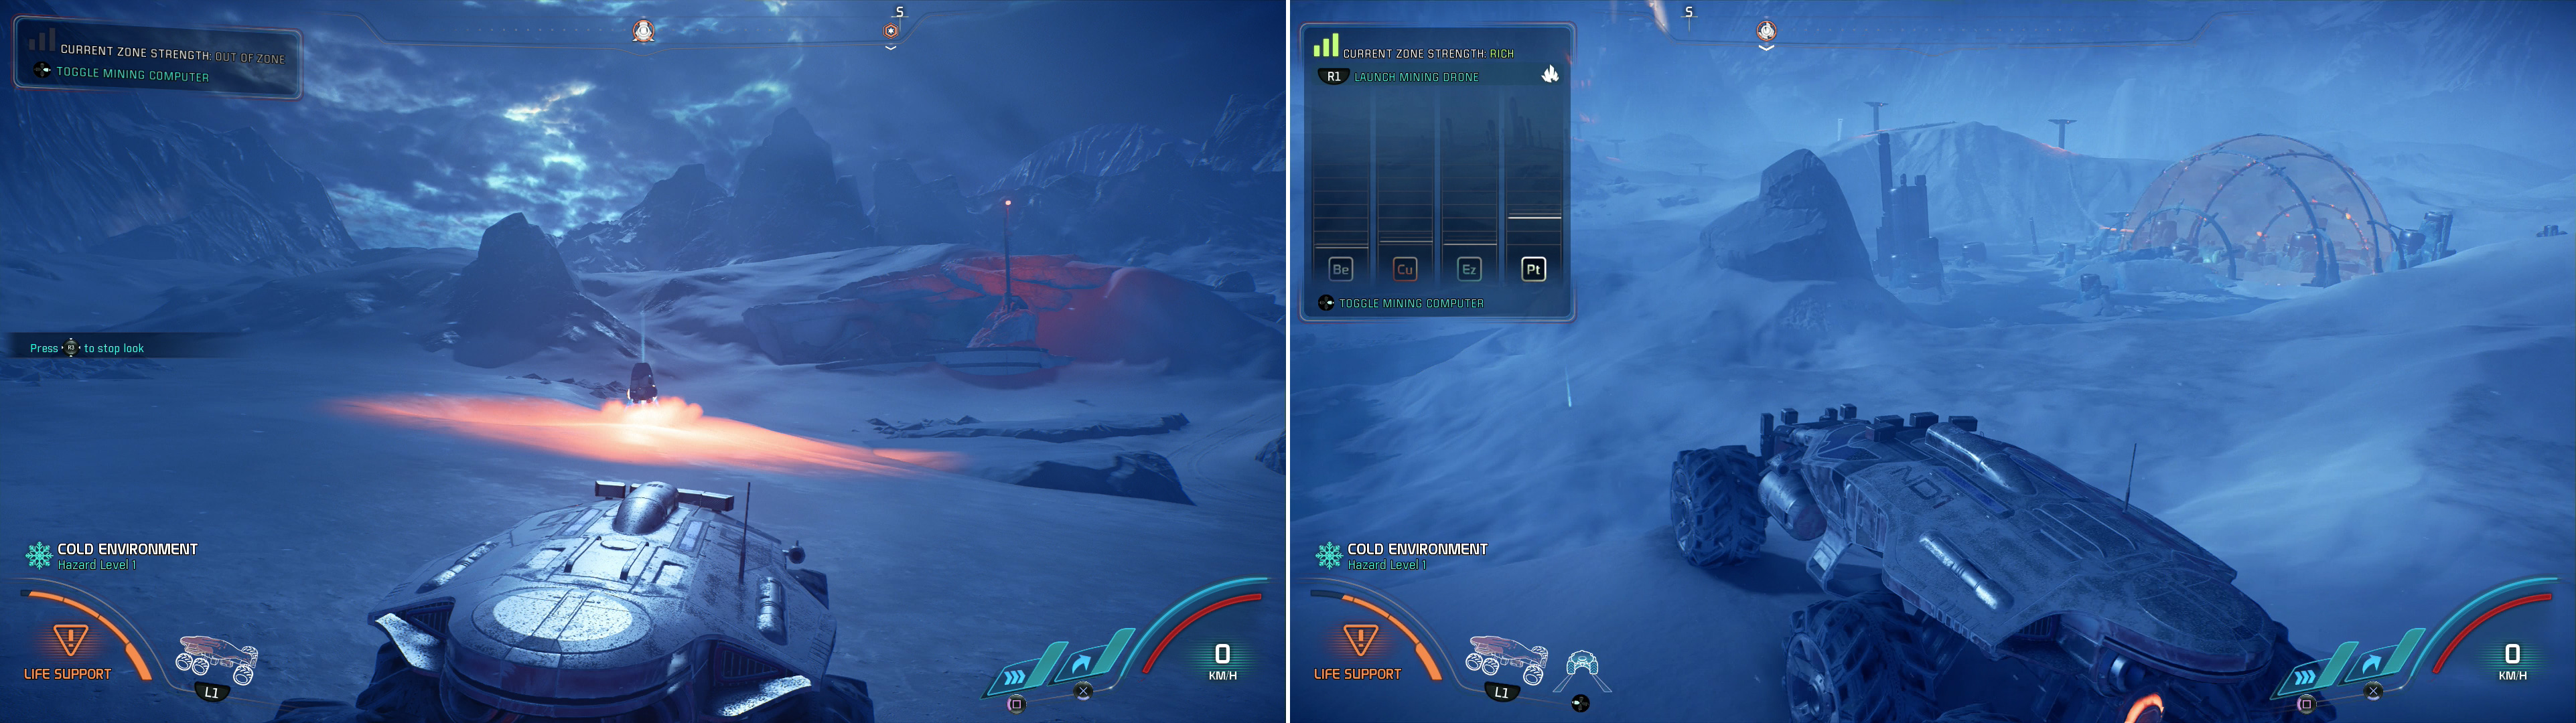 Scattered Forward Stations will provide zones of safety amidst Voelds harsh weather (left) and the planet is unusually abundant in valuable resources (right).